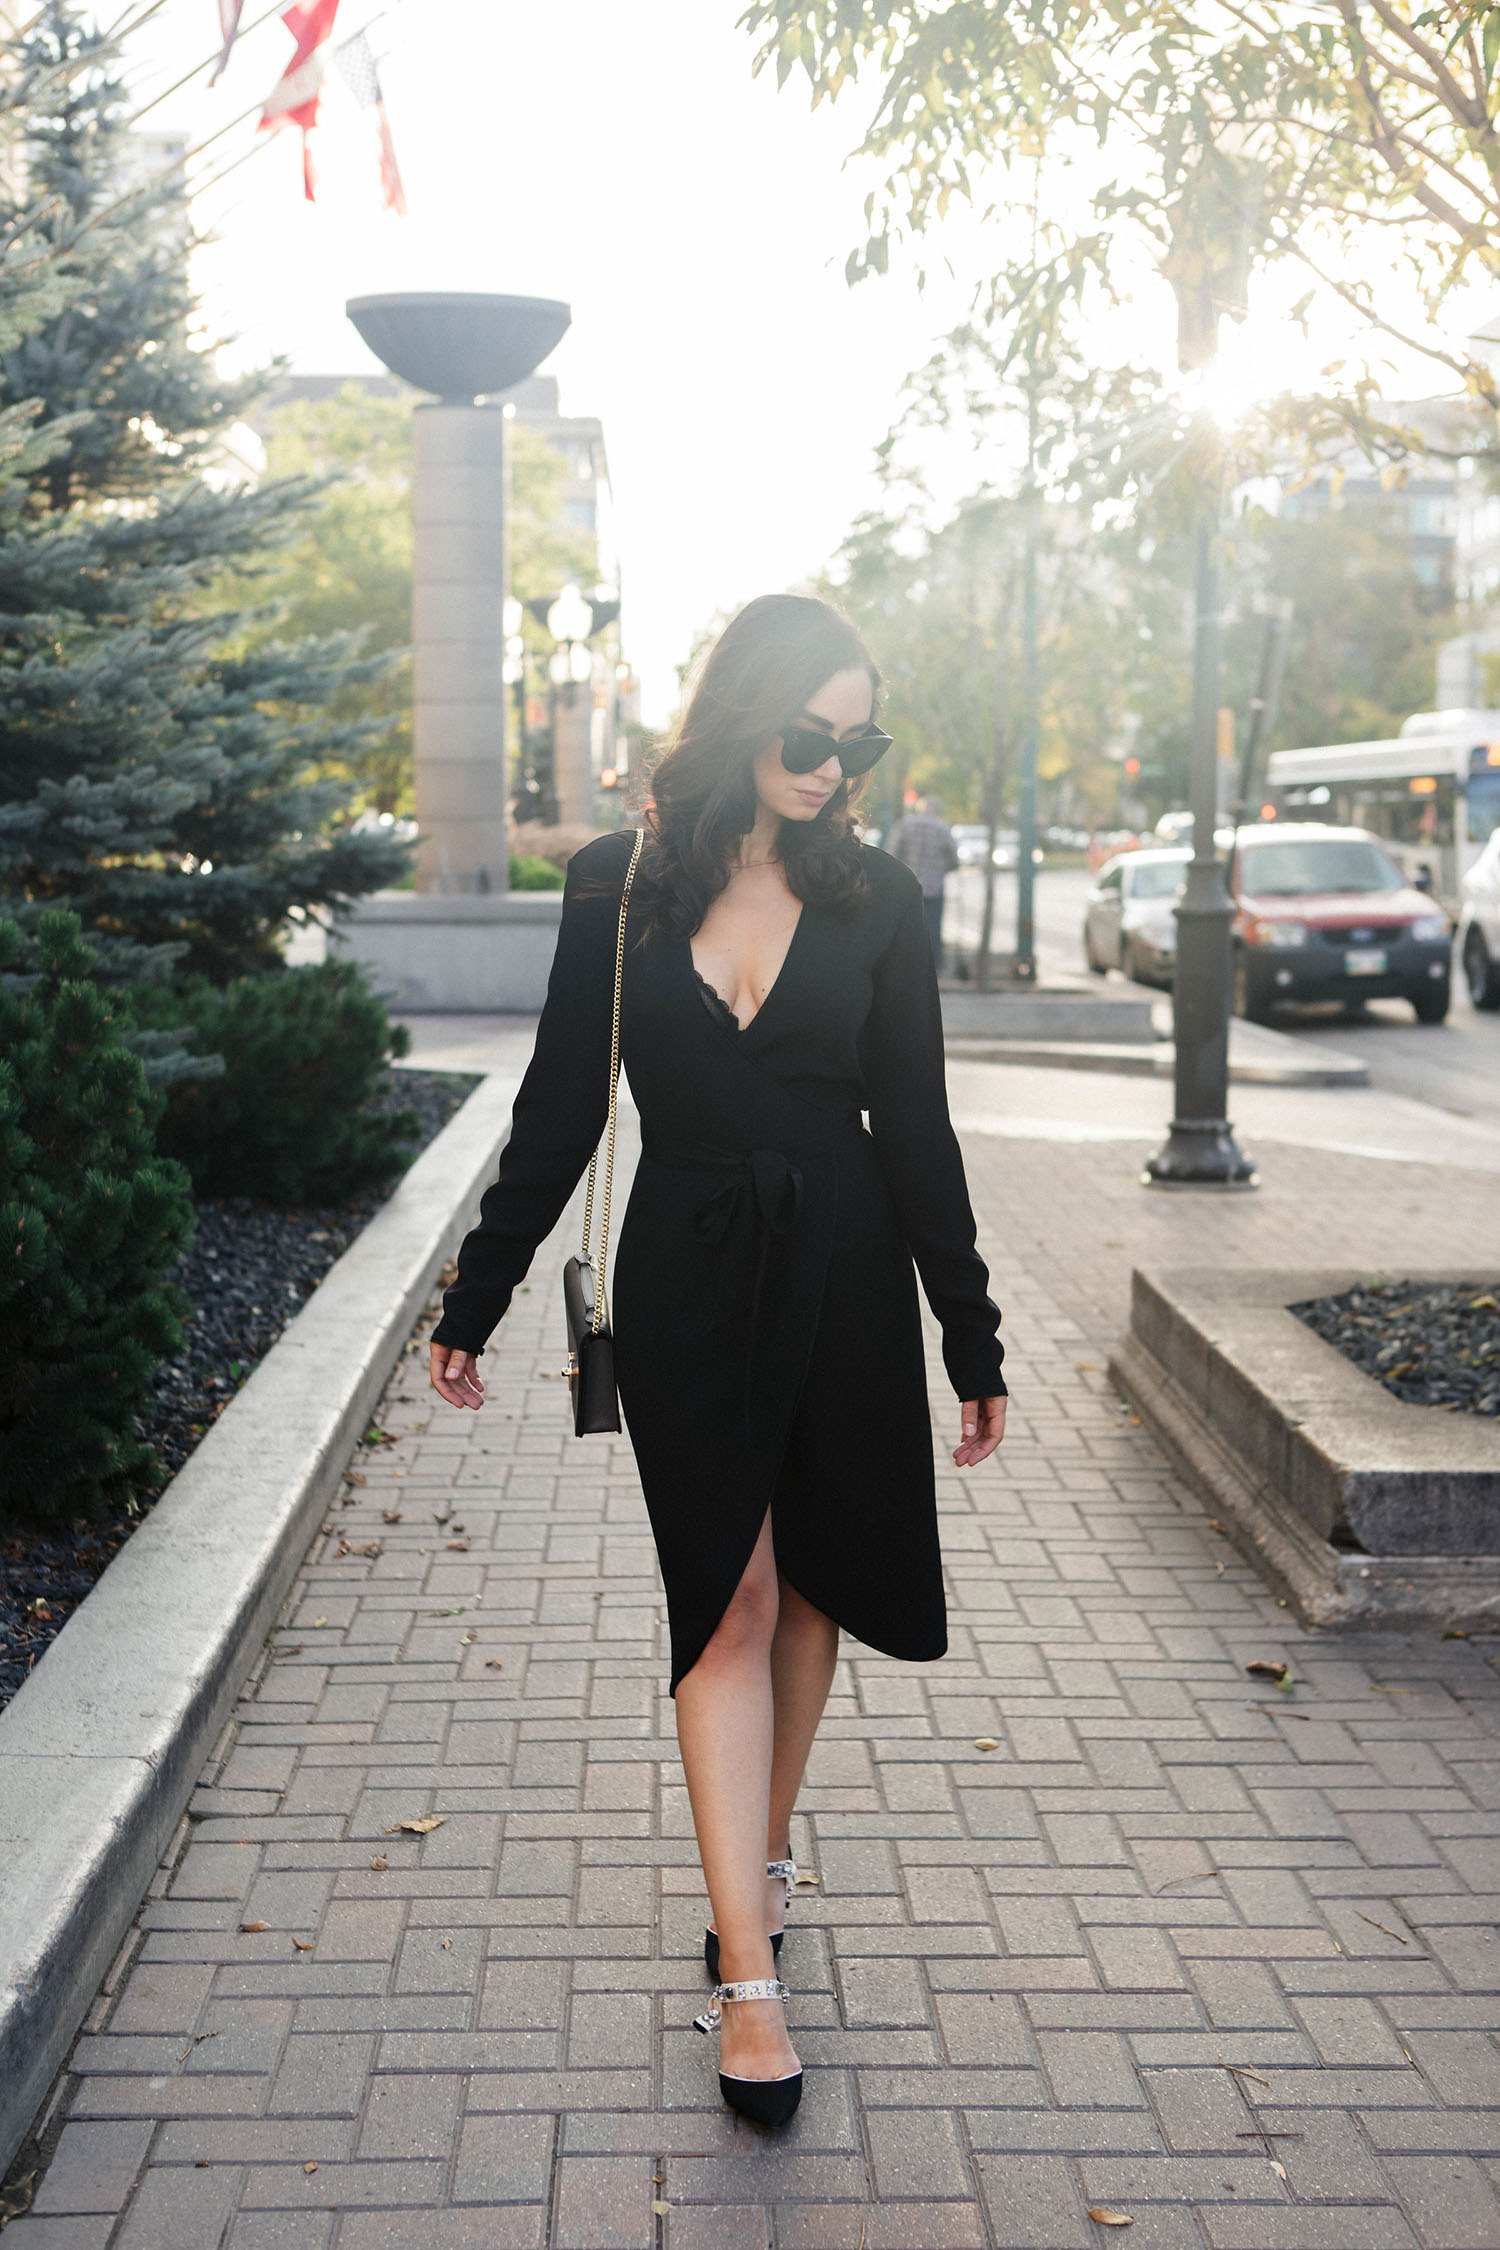 Fashion blogger Cee Fardoe of Coco & Vera walks in front of the Fort Garry Hotel in Winnipeg, wears a Rodarte x & Other Stories dress, as captured by Christa Wong Photography